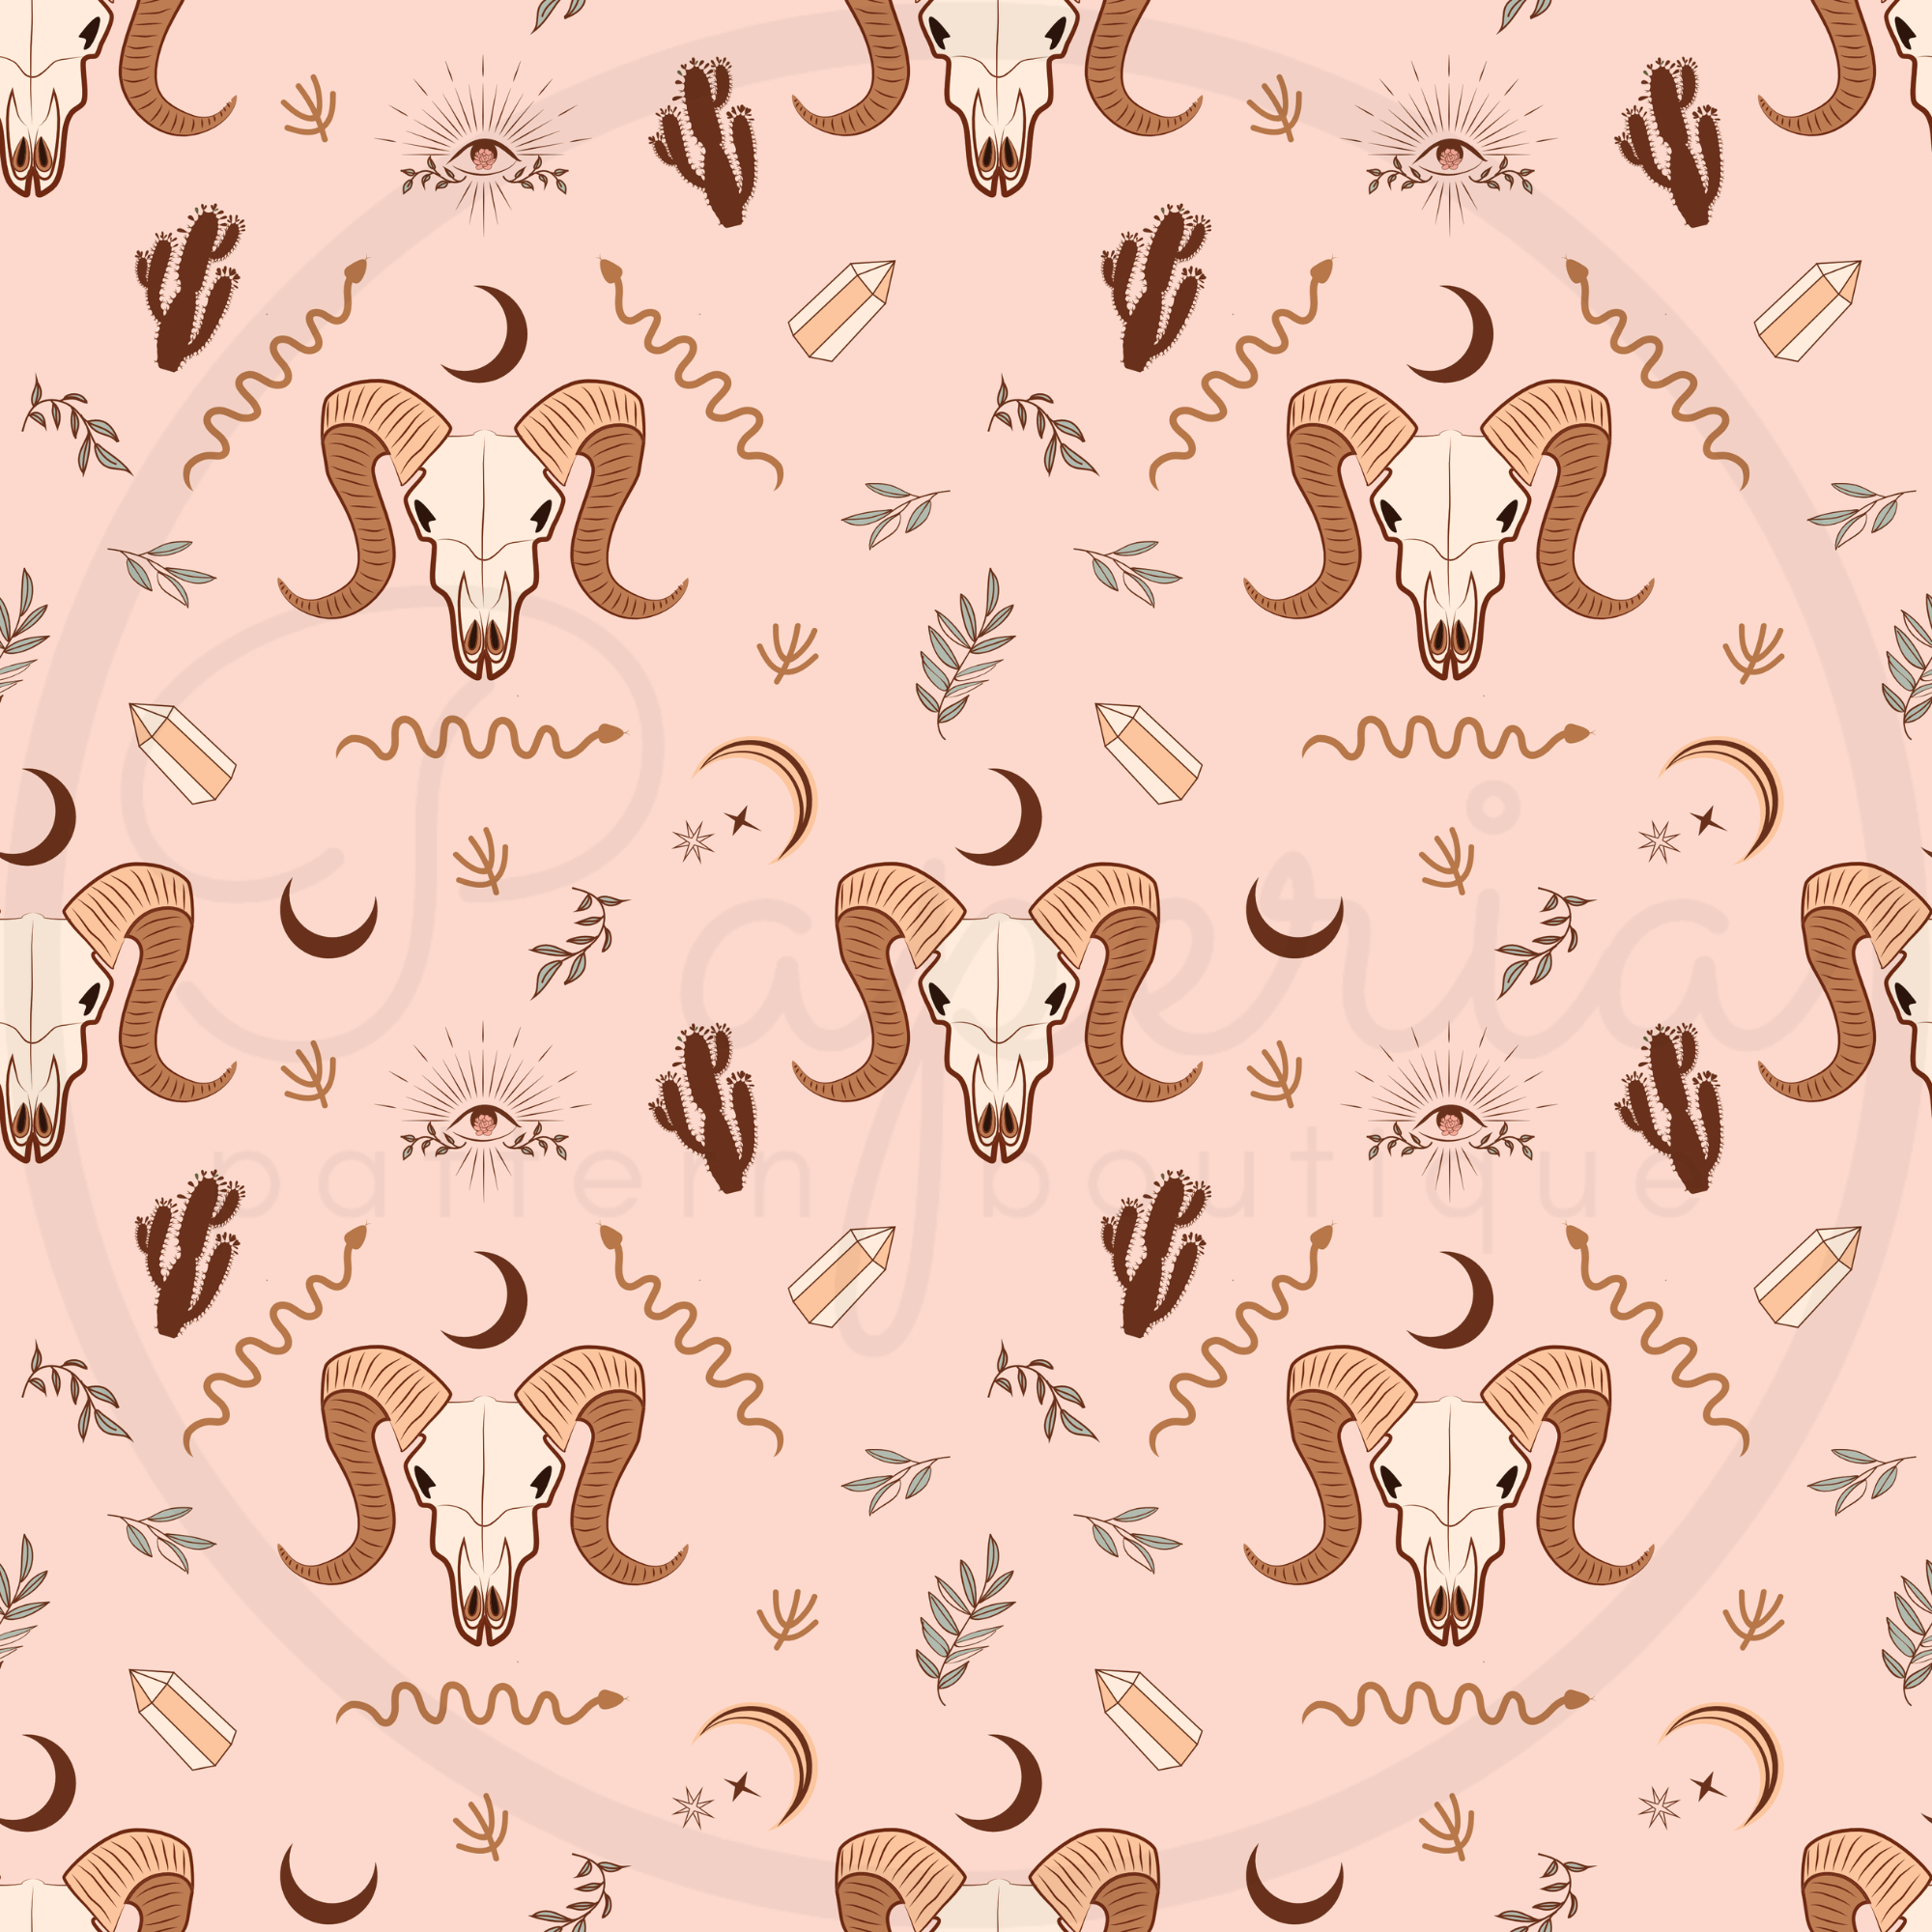 Boho Skull Seamless Repeating Pattern File for Fabric